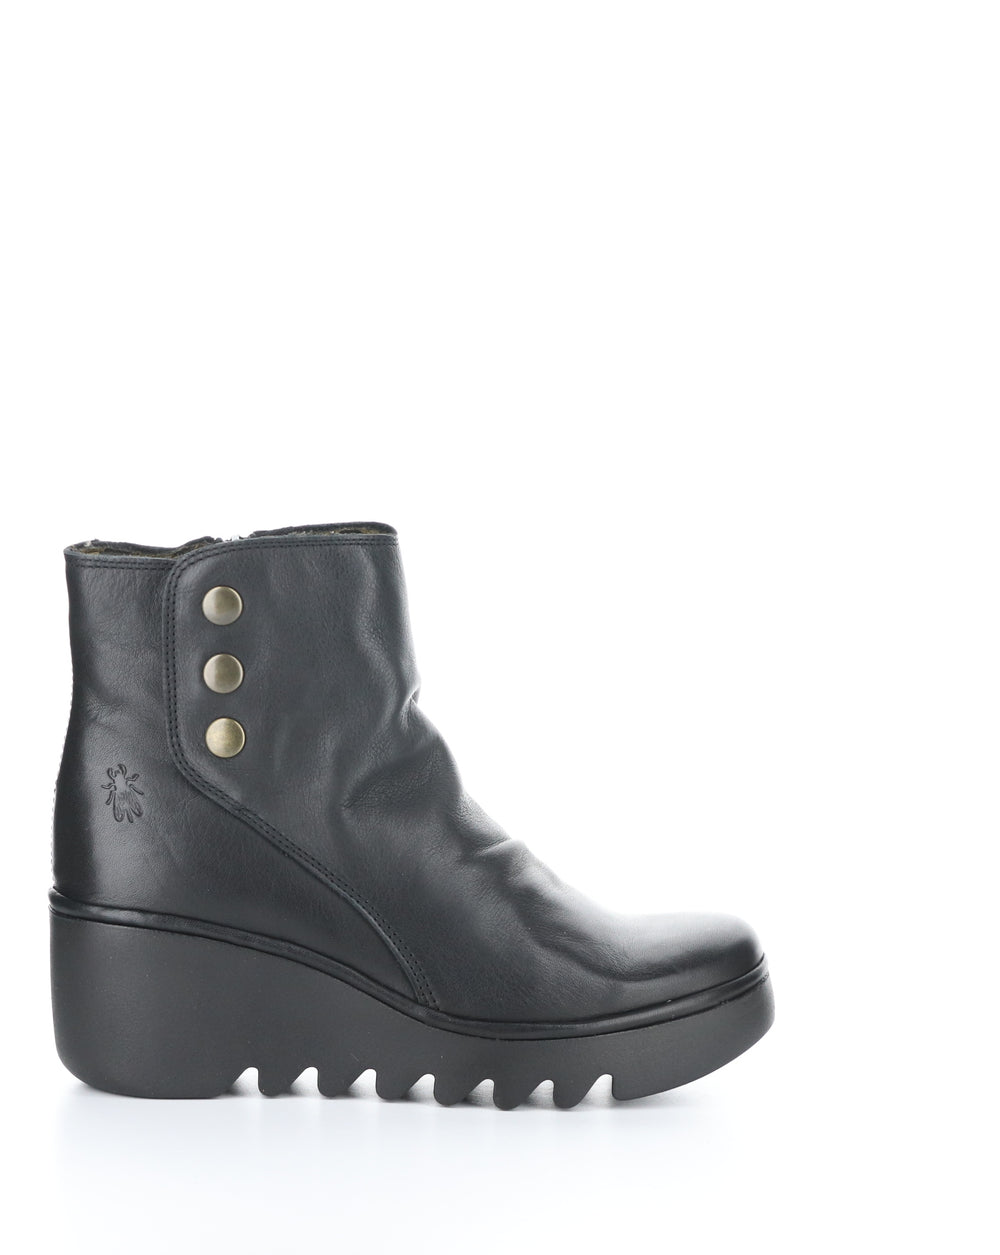 BROM344FLY 008 BLACK Round Toe Boots